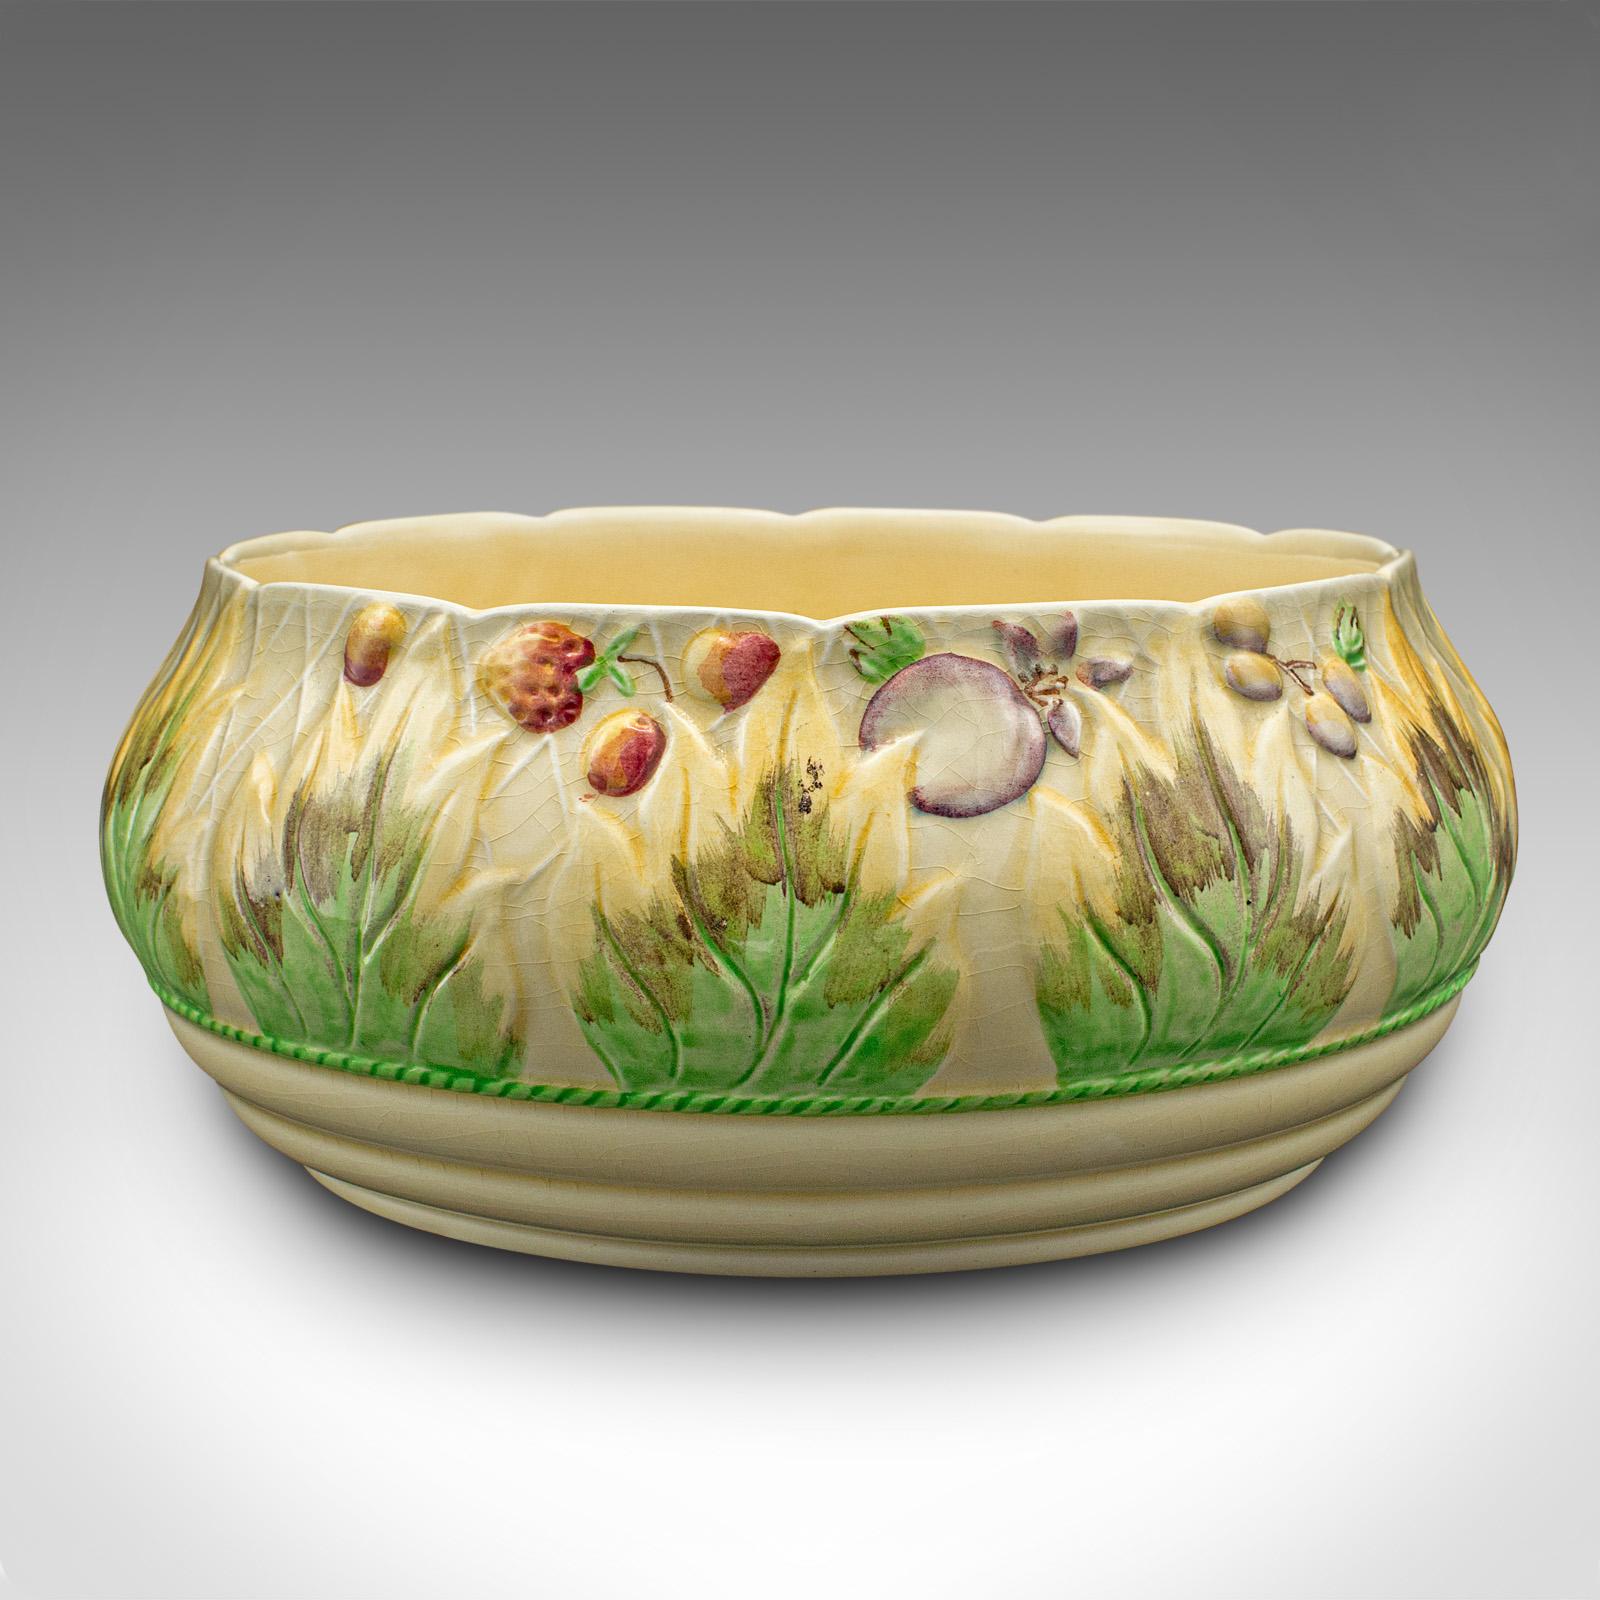 This is a large vintage fruit bowl. An English, hand painted ceramic decorative dish, dating to the early 20th century, circa 1930.

Wonderful countryside appeal to this charming fruit bowl
Displays a desirable aged patina and in good order
Ceramic